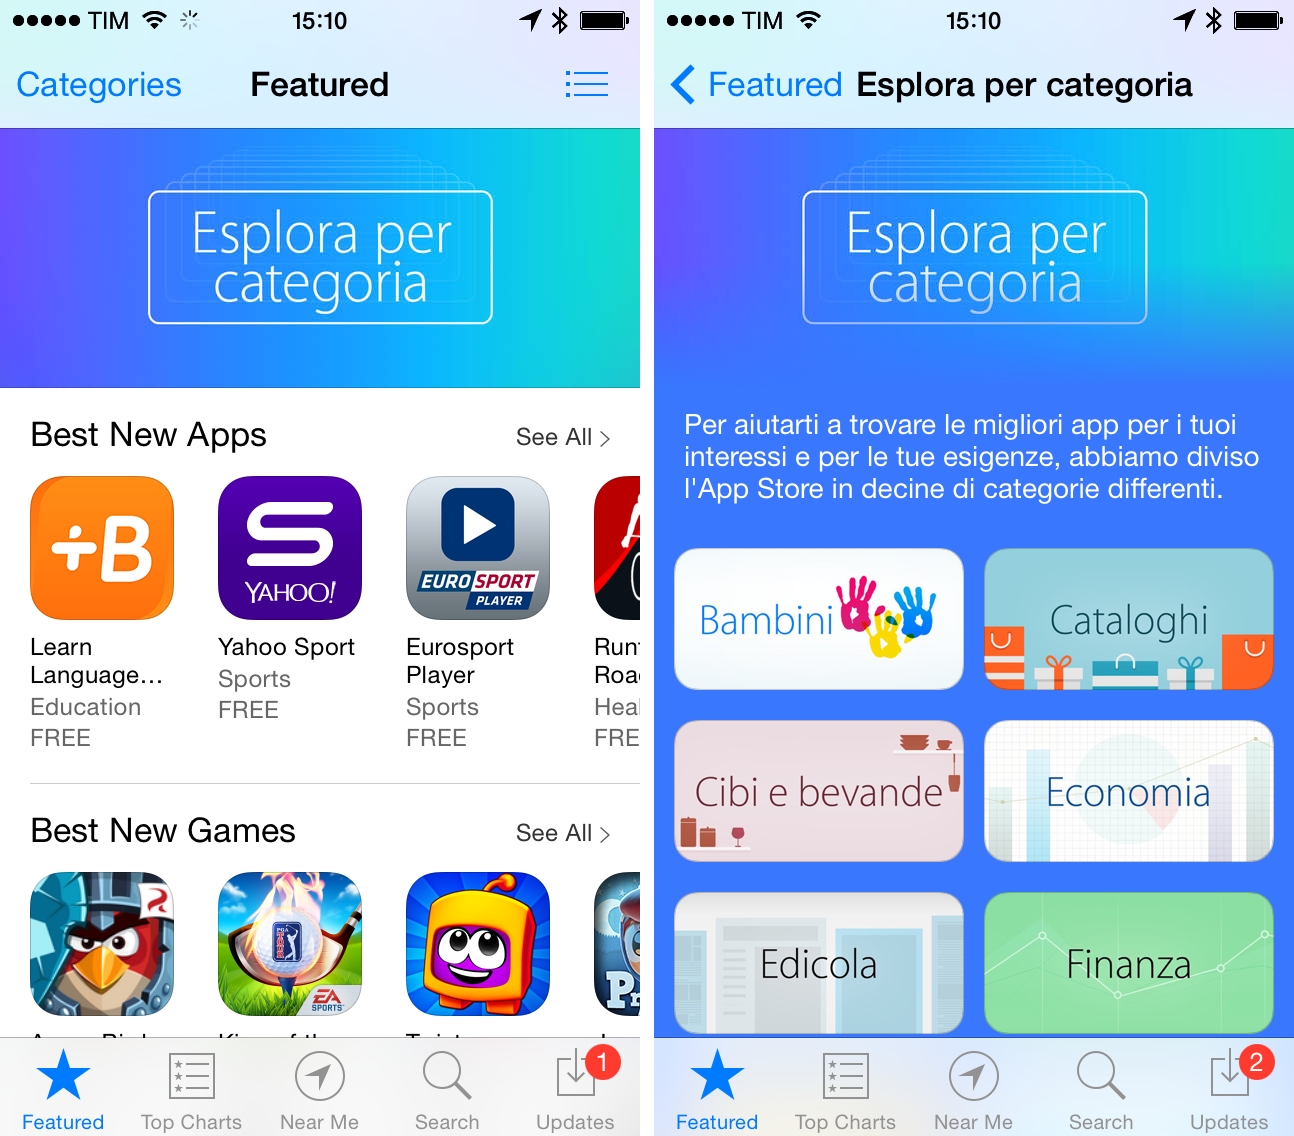 Apple's promotion for curated categories on the Italian App Store.